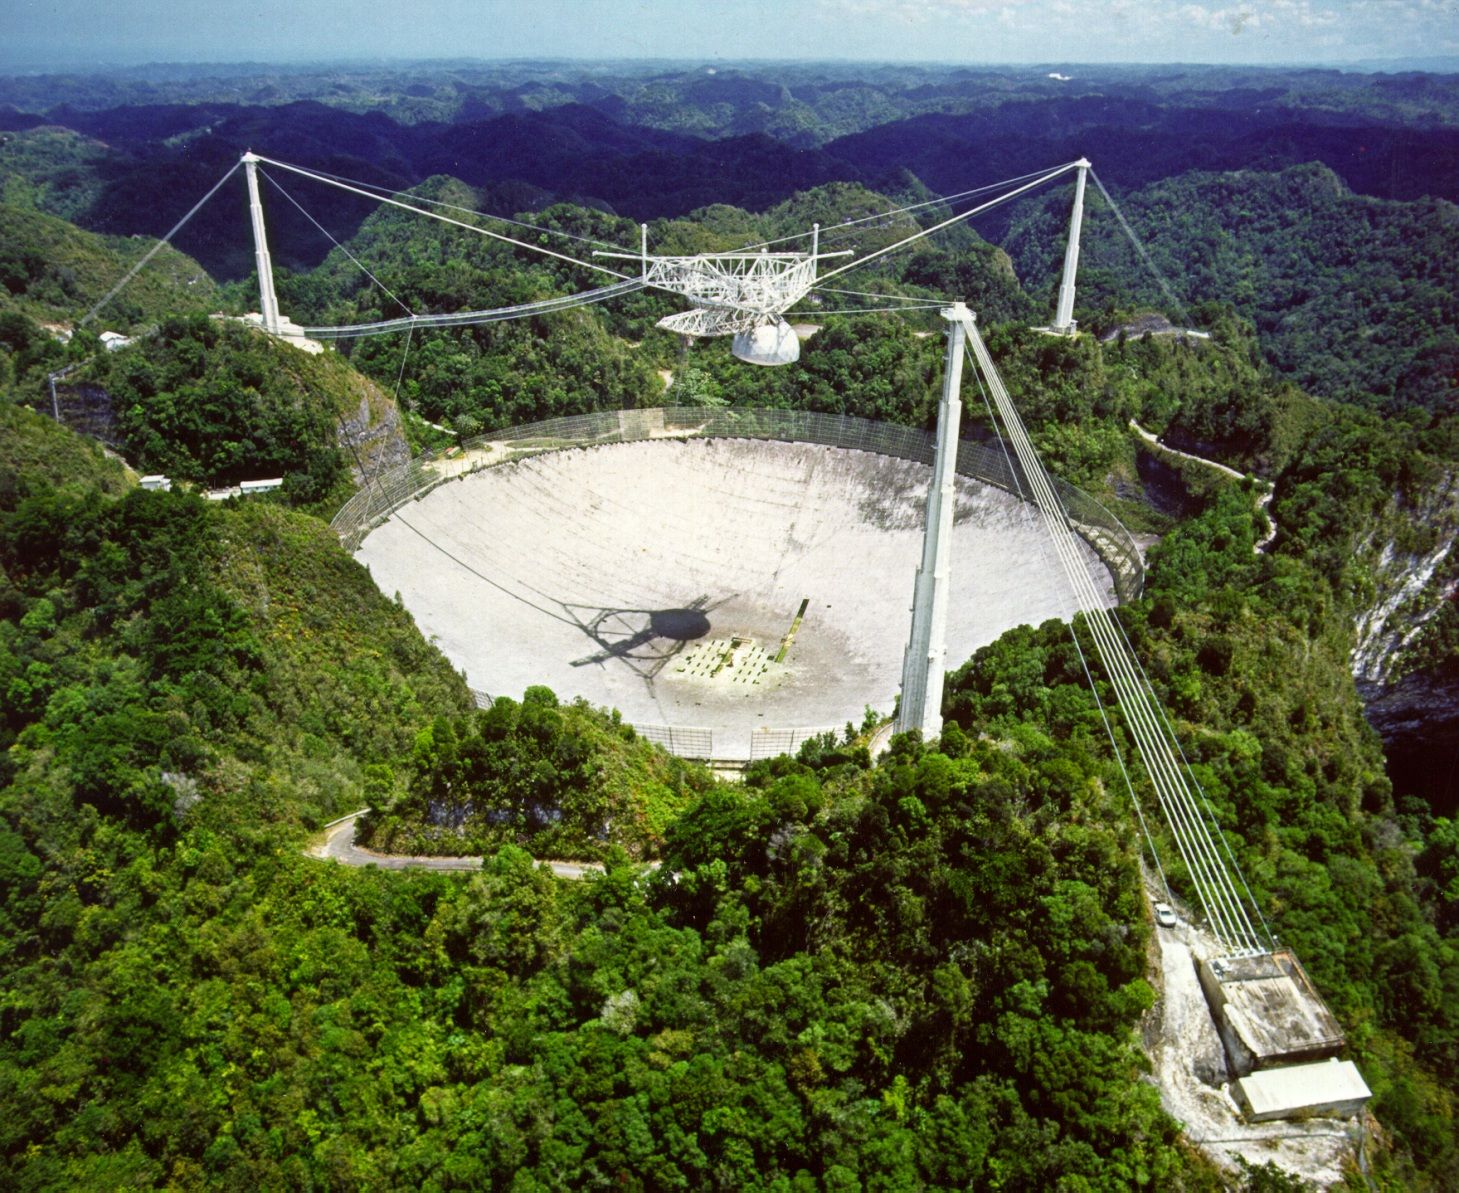 /assets/contentimages/Arecibo_Observatory.jpg